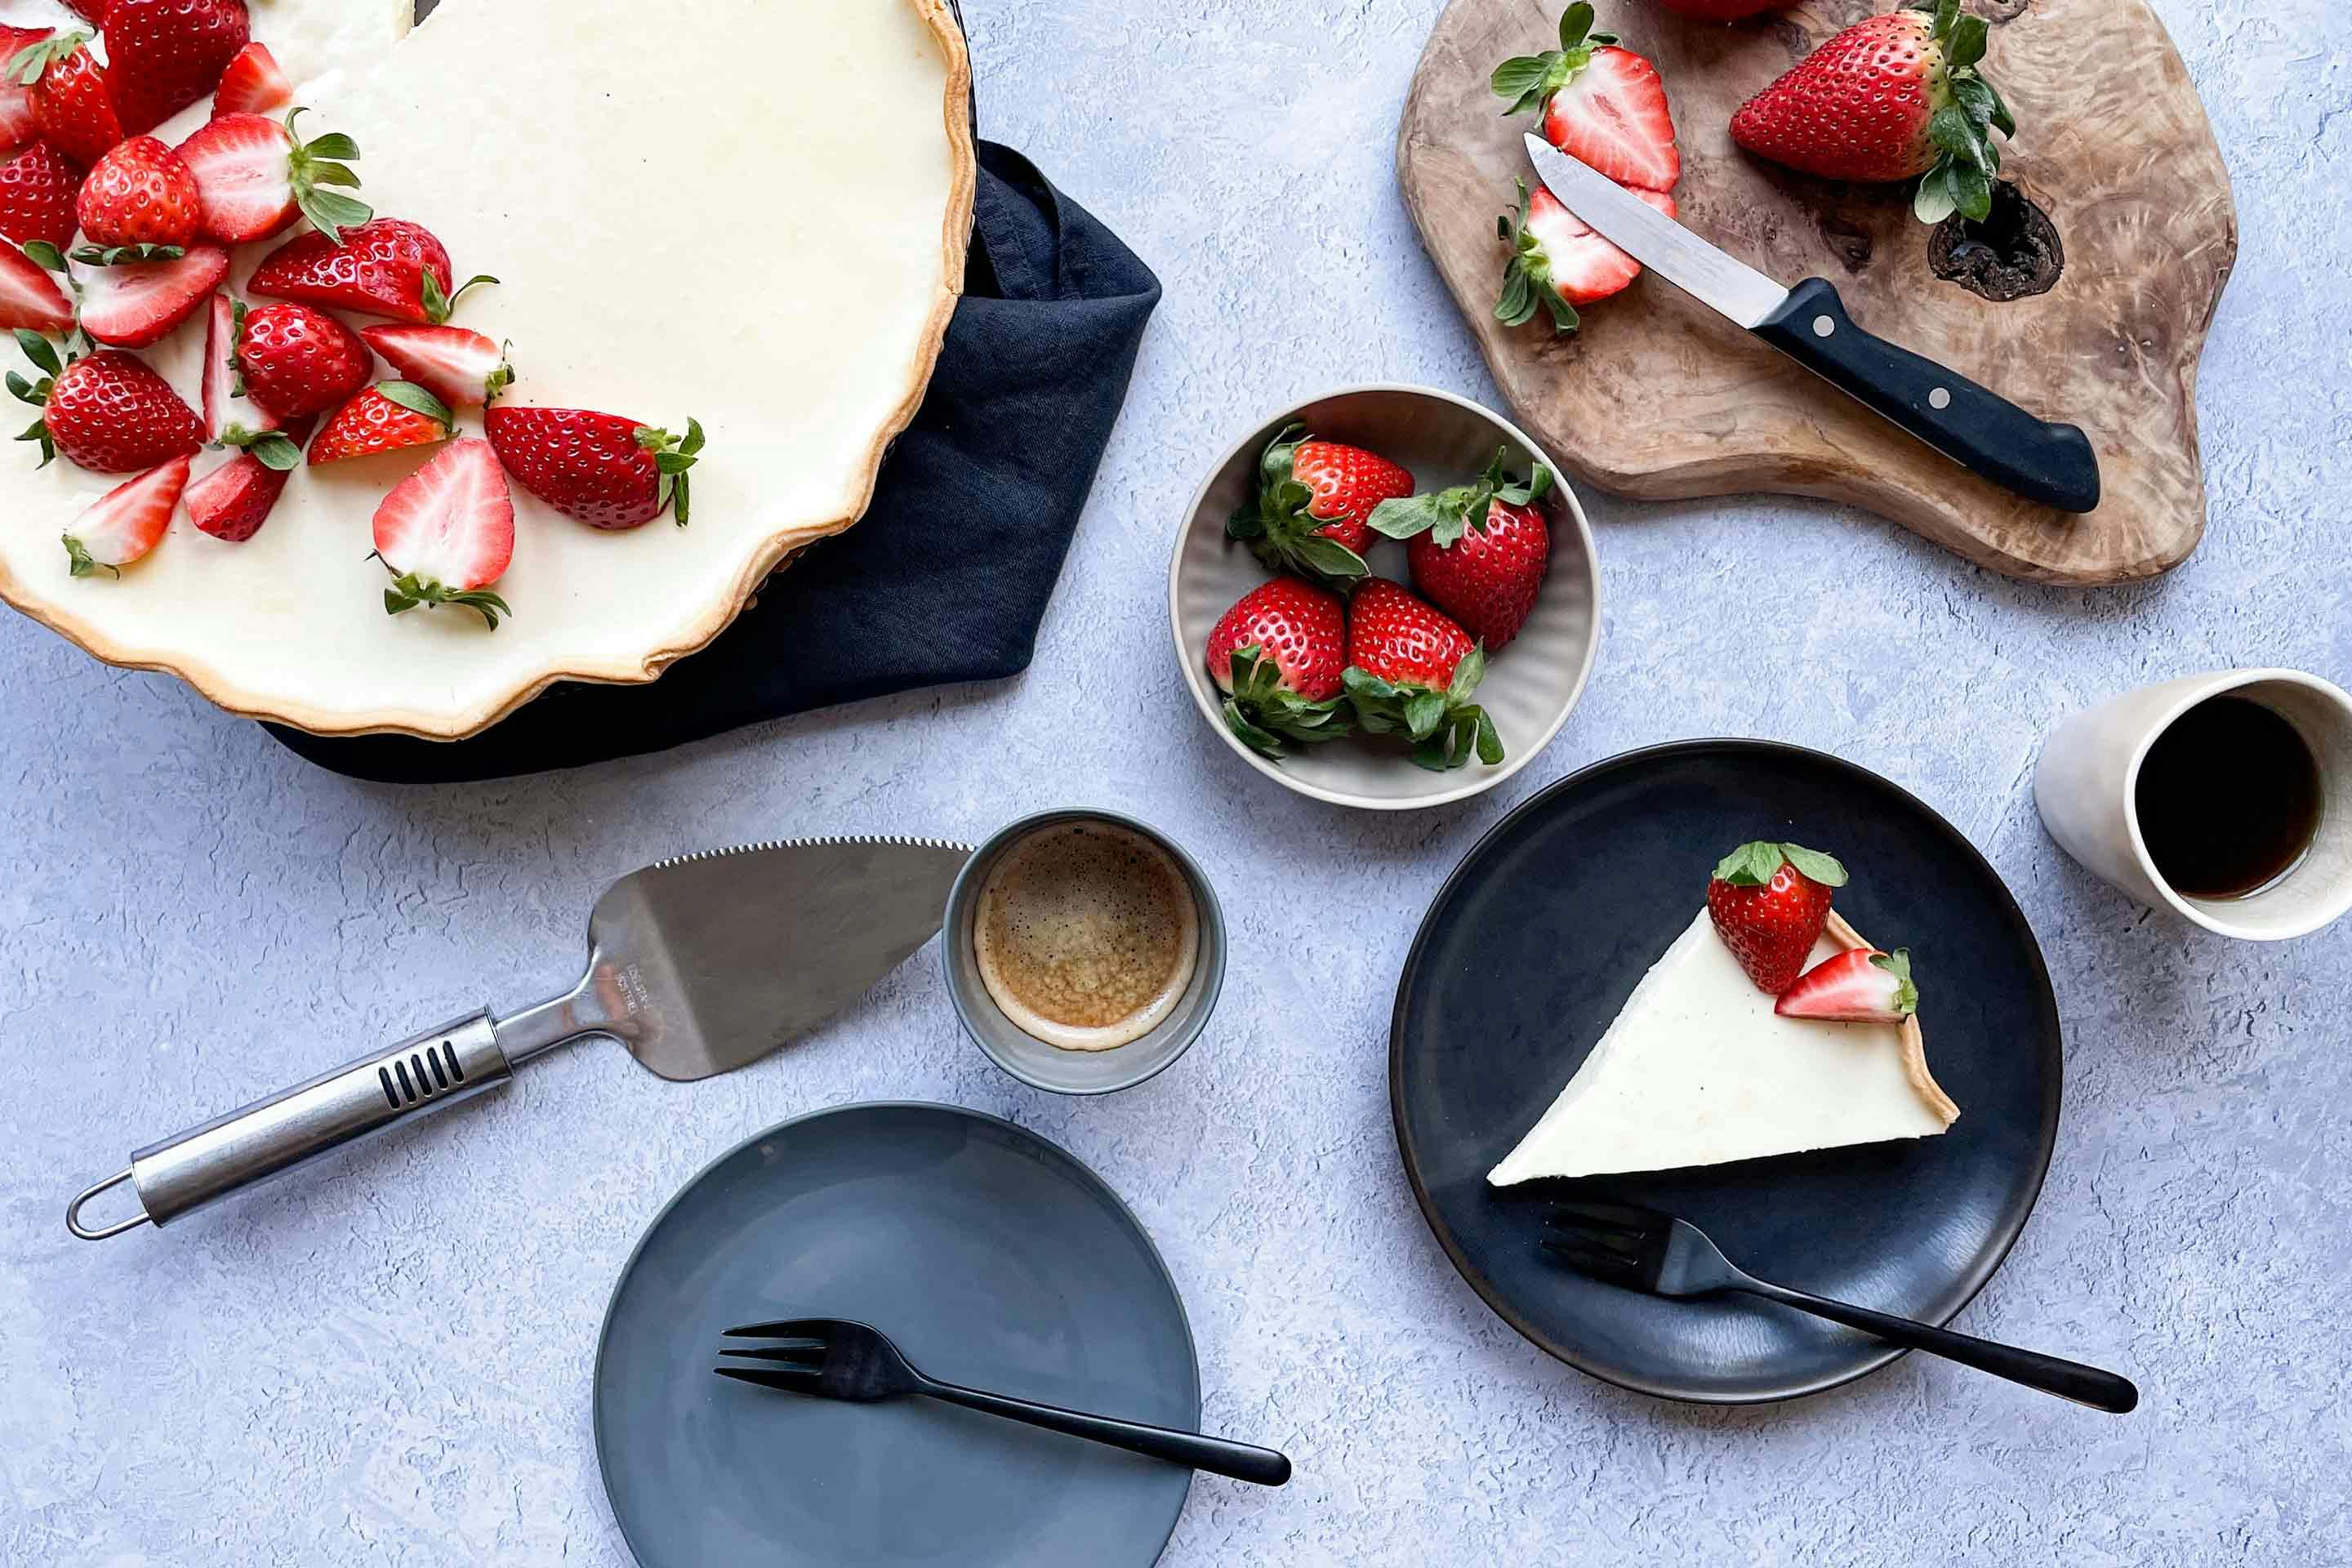 Strawberry panna cotta tart served on a plate with a cup of coffee.